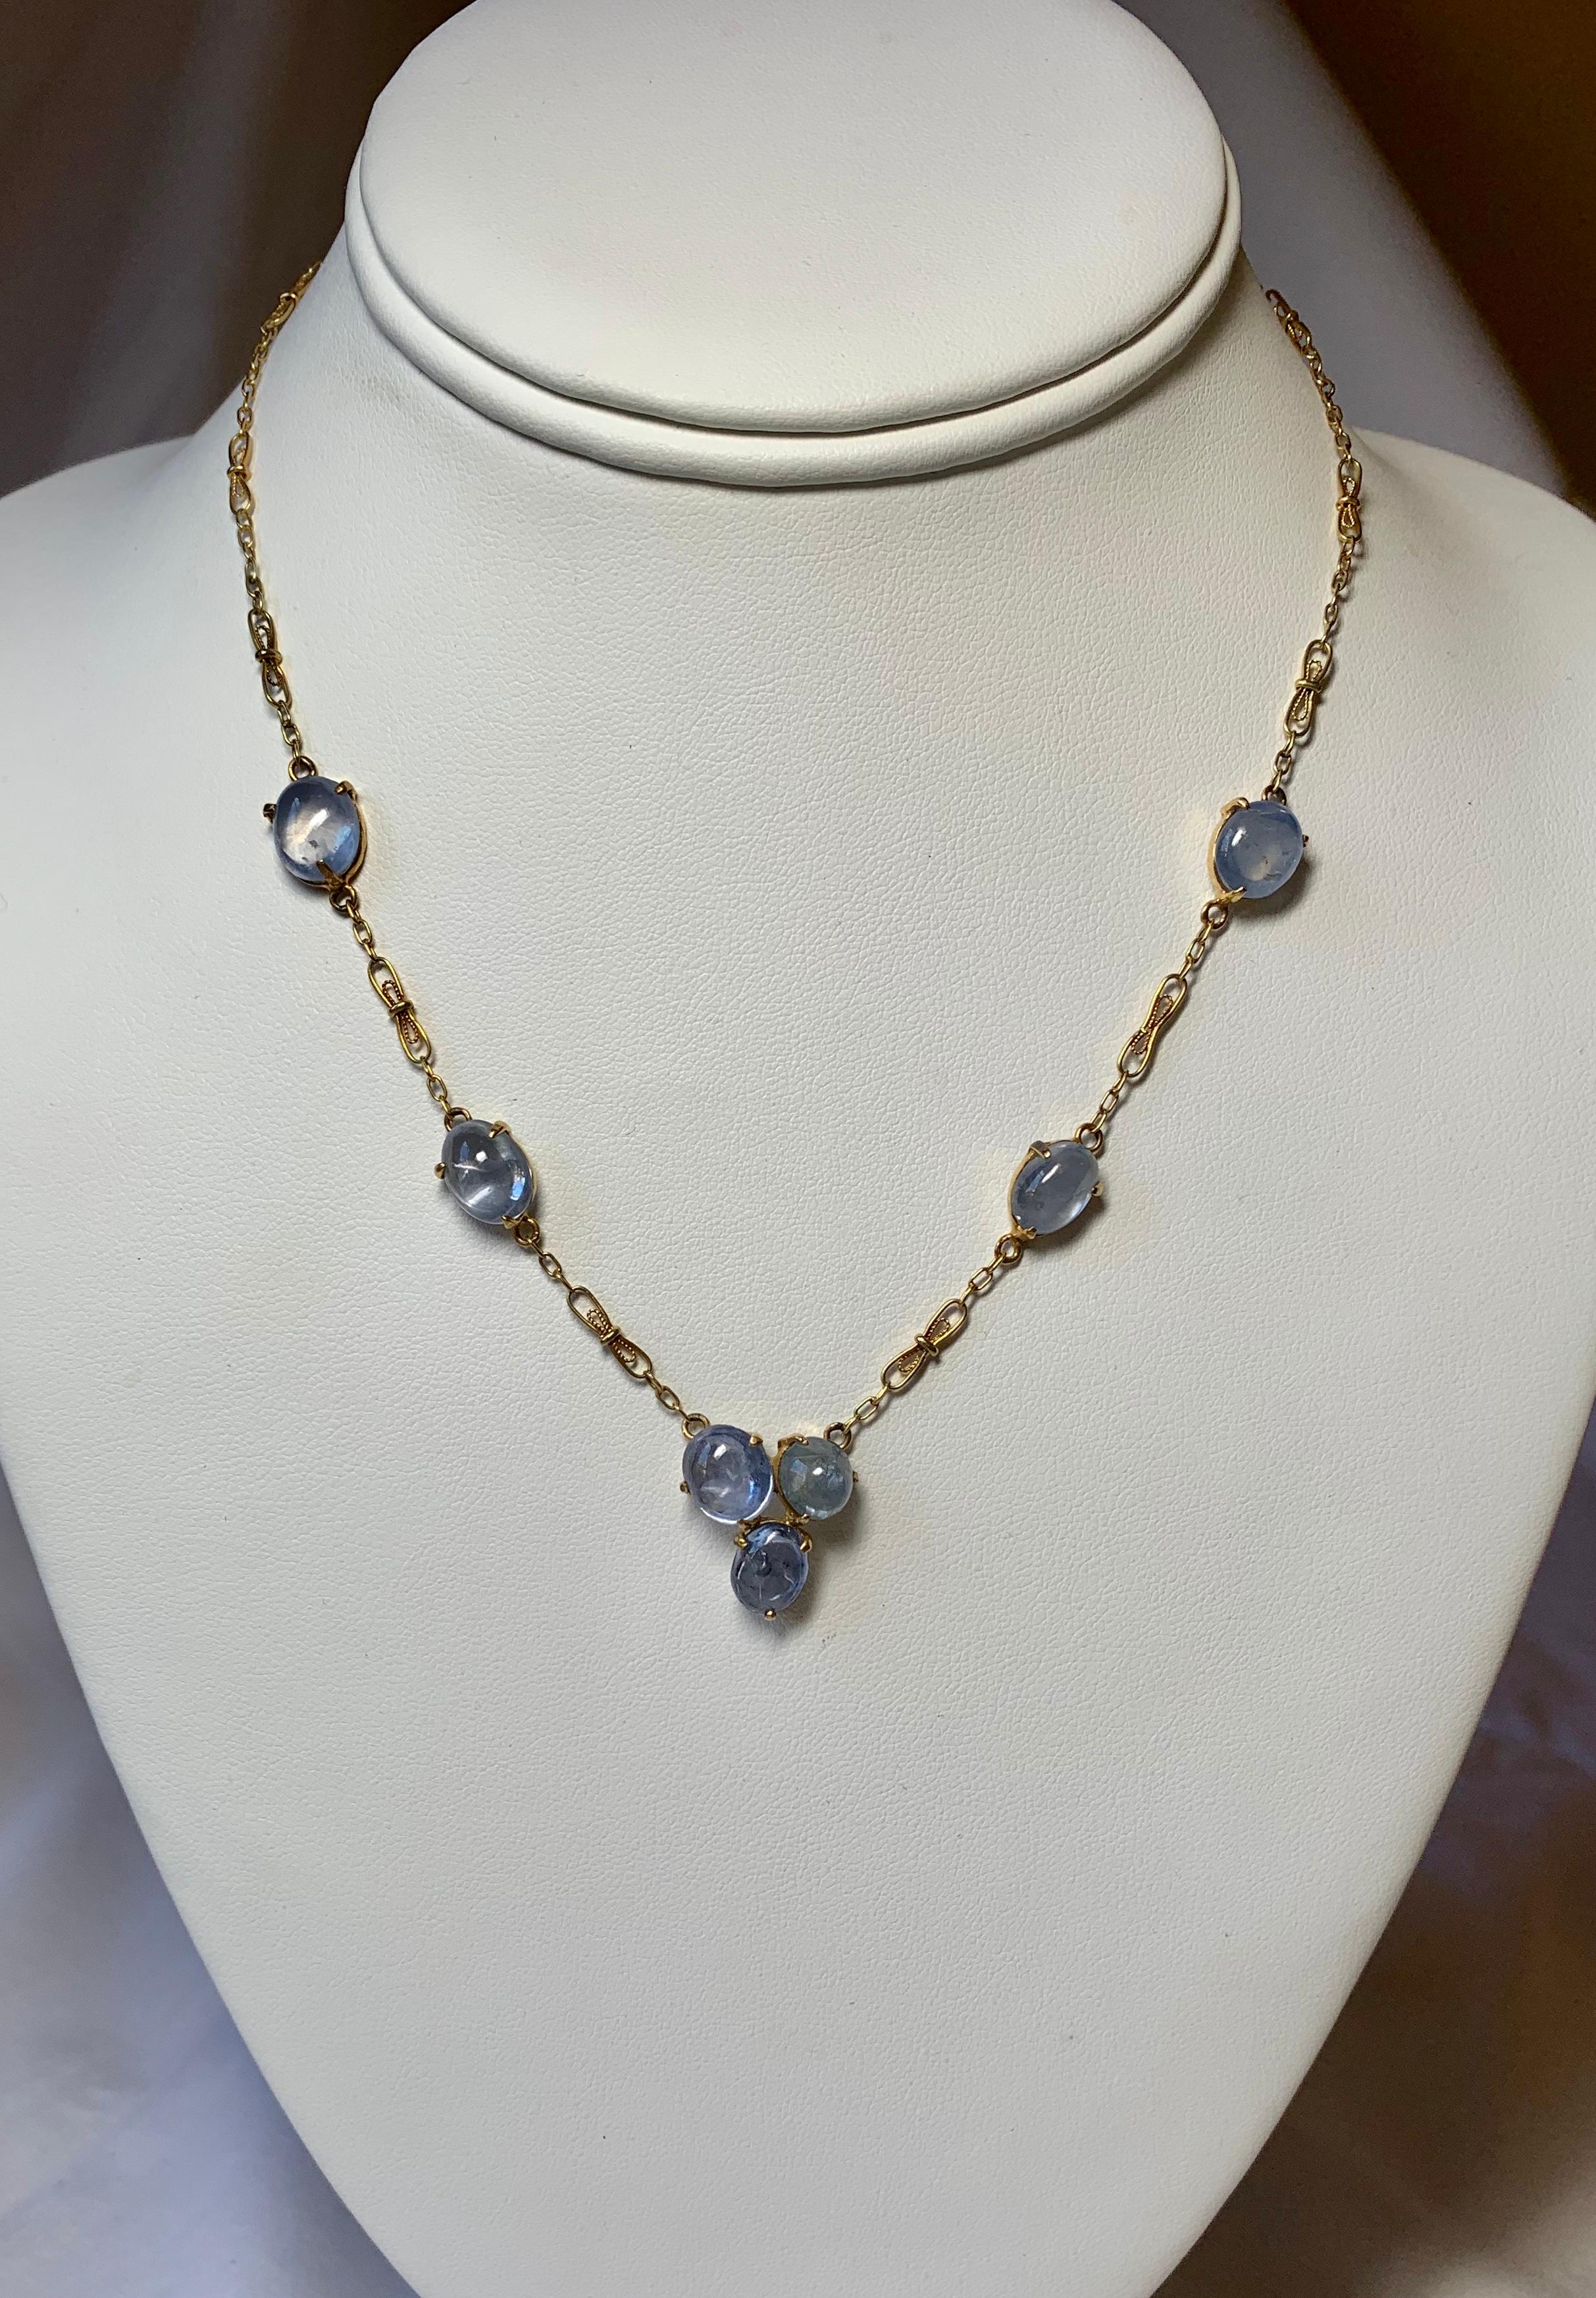 A stunning antique Victorian - Edwardian Sapphire Necklace with a gorgeous Fetter Link Chain in 14 Karat Gold.  This rare antique necklace features 7 fine blue natural mined Sapphire gems.  The sapphires are cabochon cut oval gems.  Each sapphire is